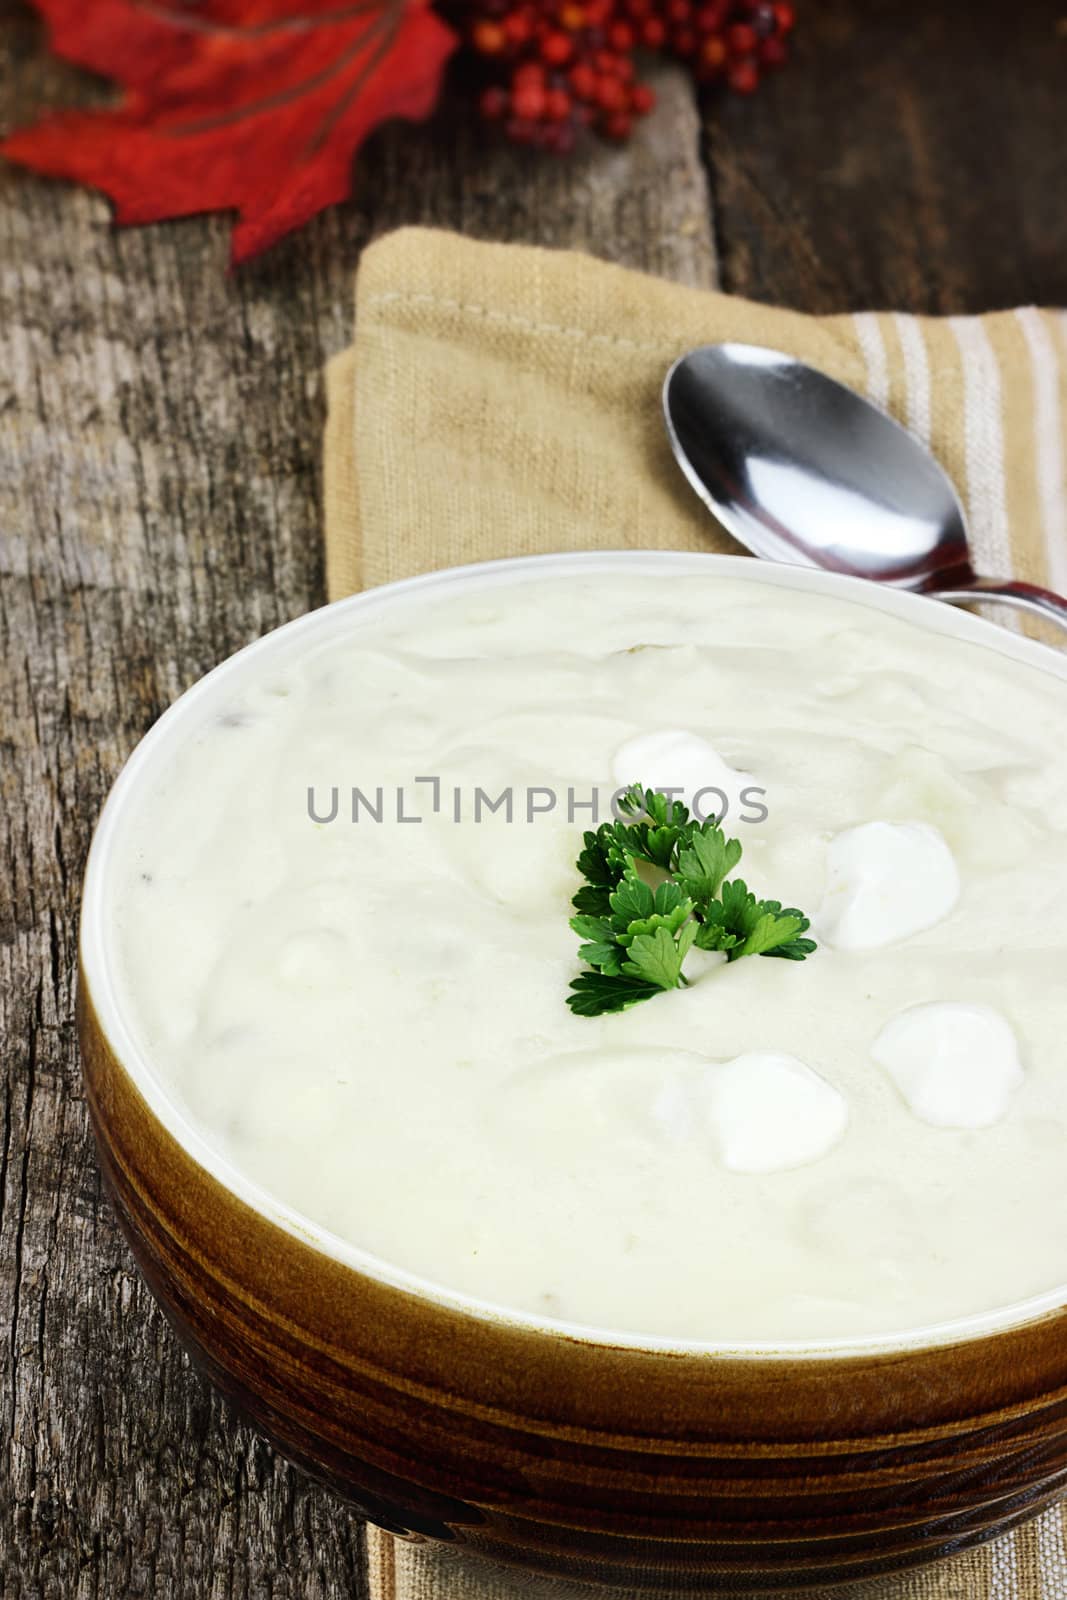 Creamy potato soup garnished with fresh parsley leaves.
